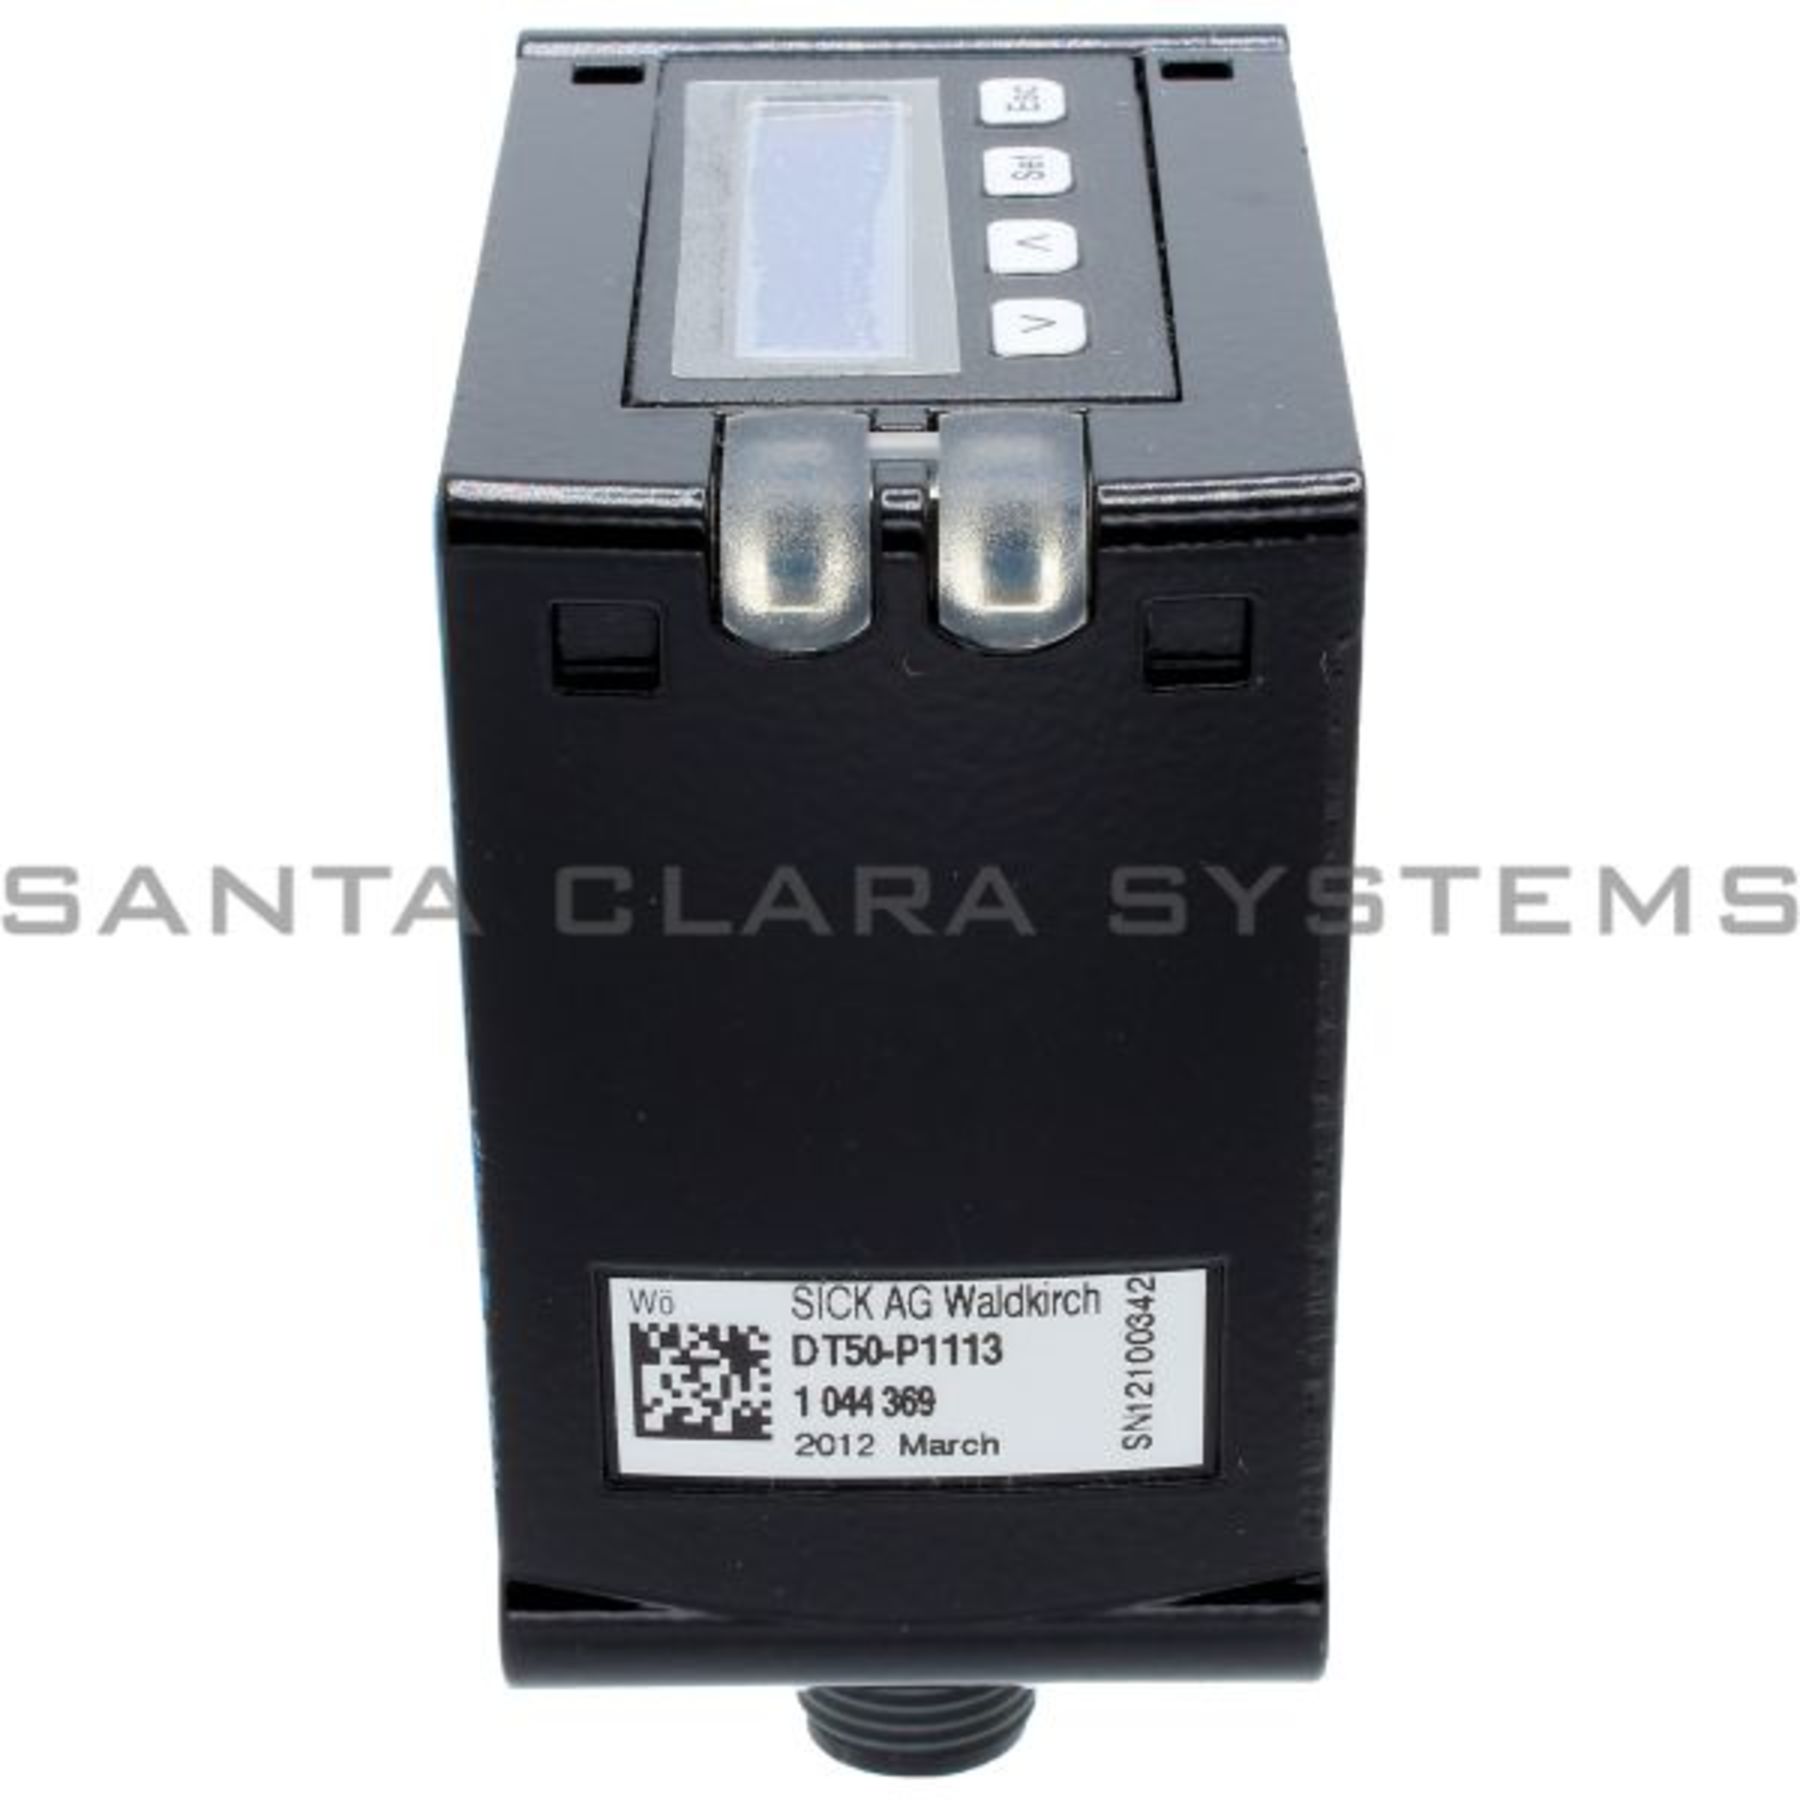 DT50-P1113 Sick In stock and ready to ship - Santa Clara Systems